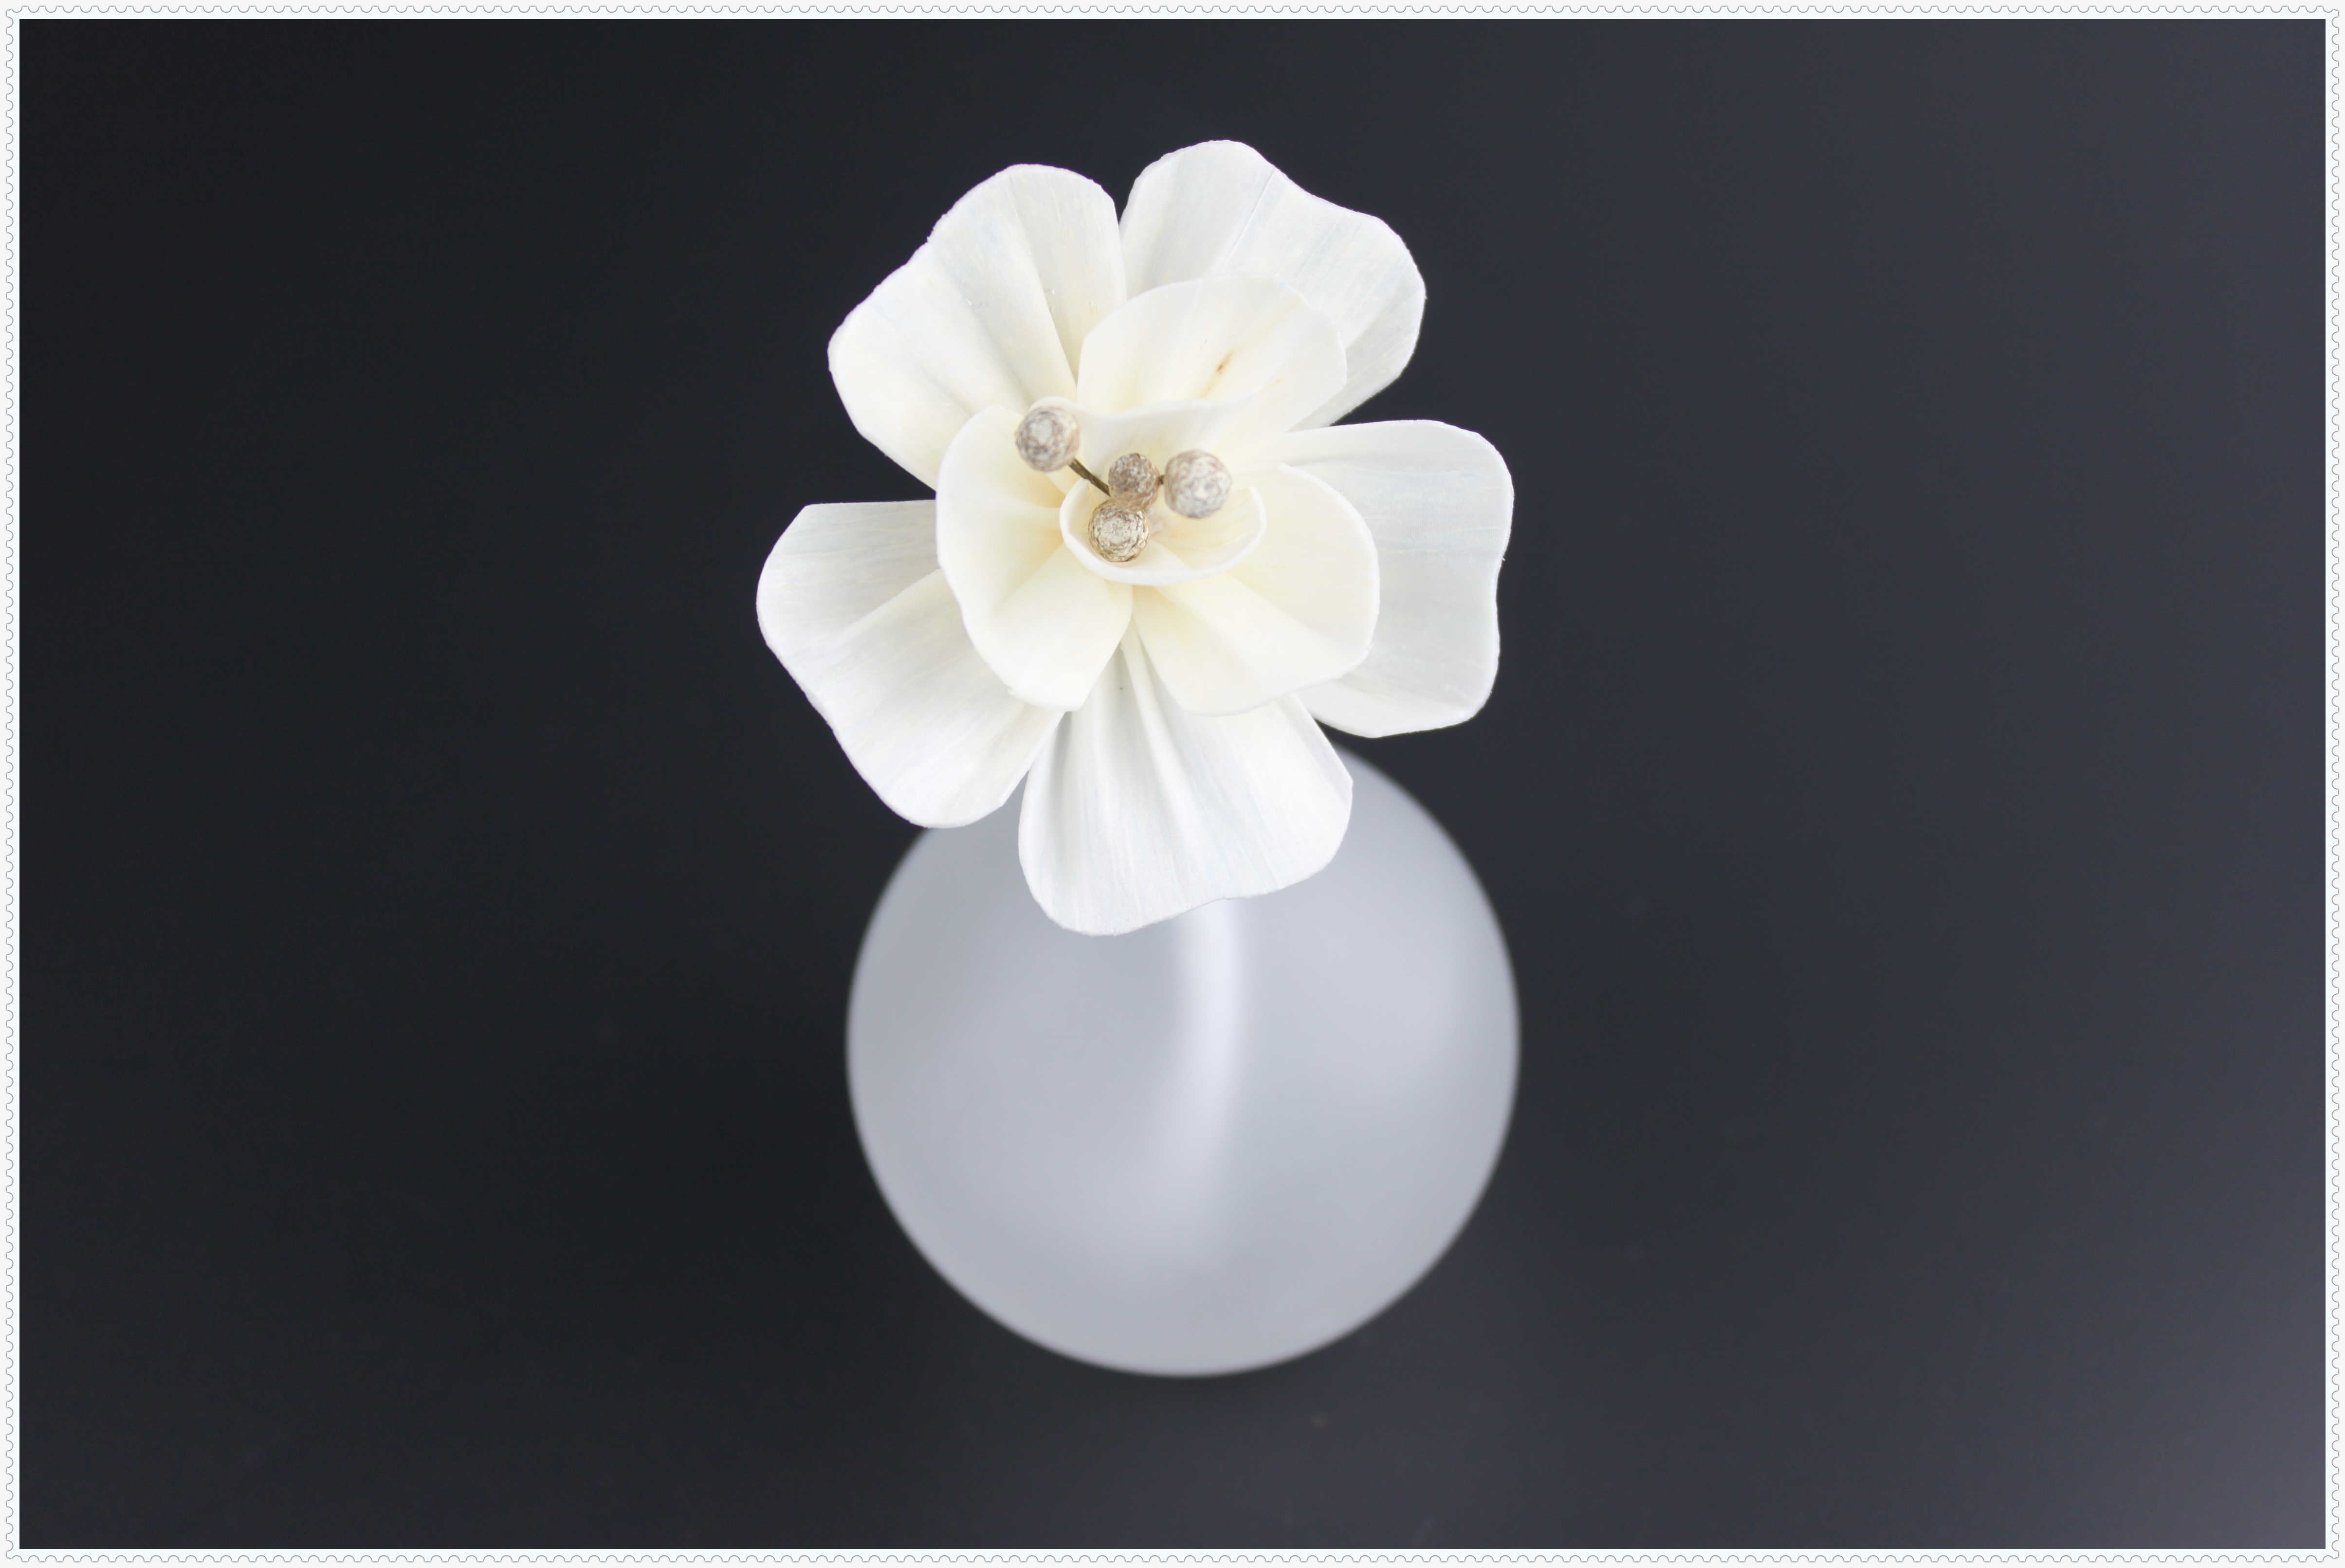 Aromatherapy Diffuser Sola Flowers 8cm Handmade Material Flowers